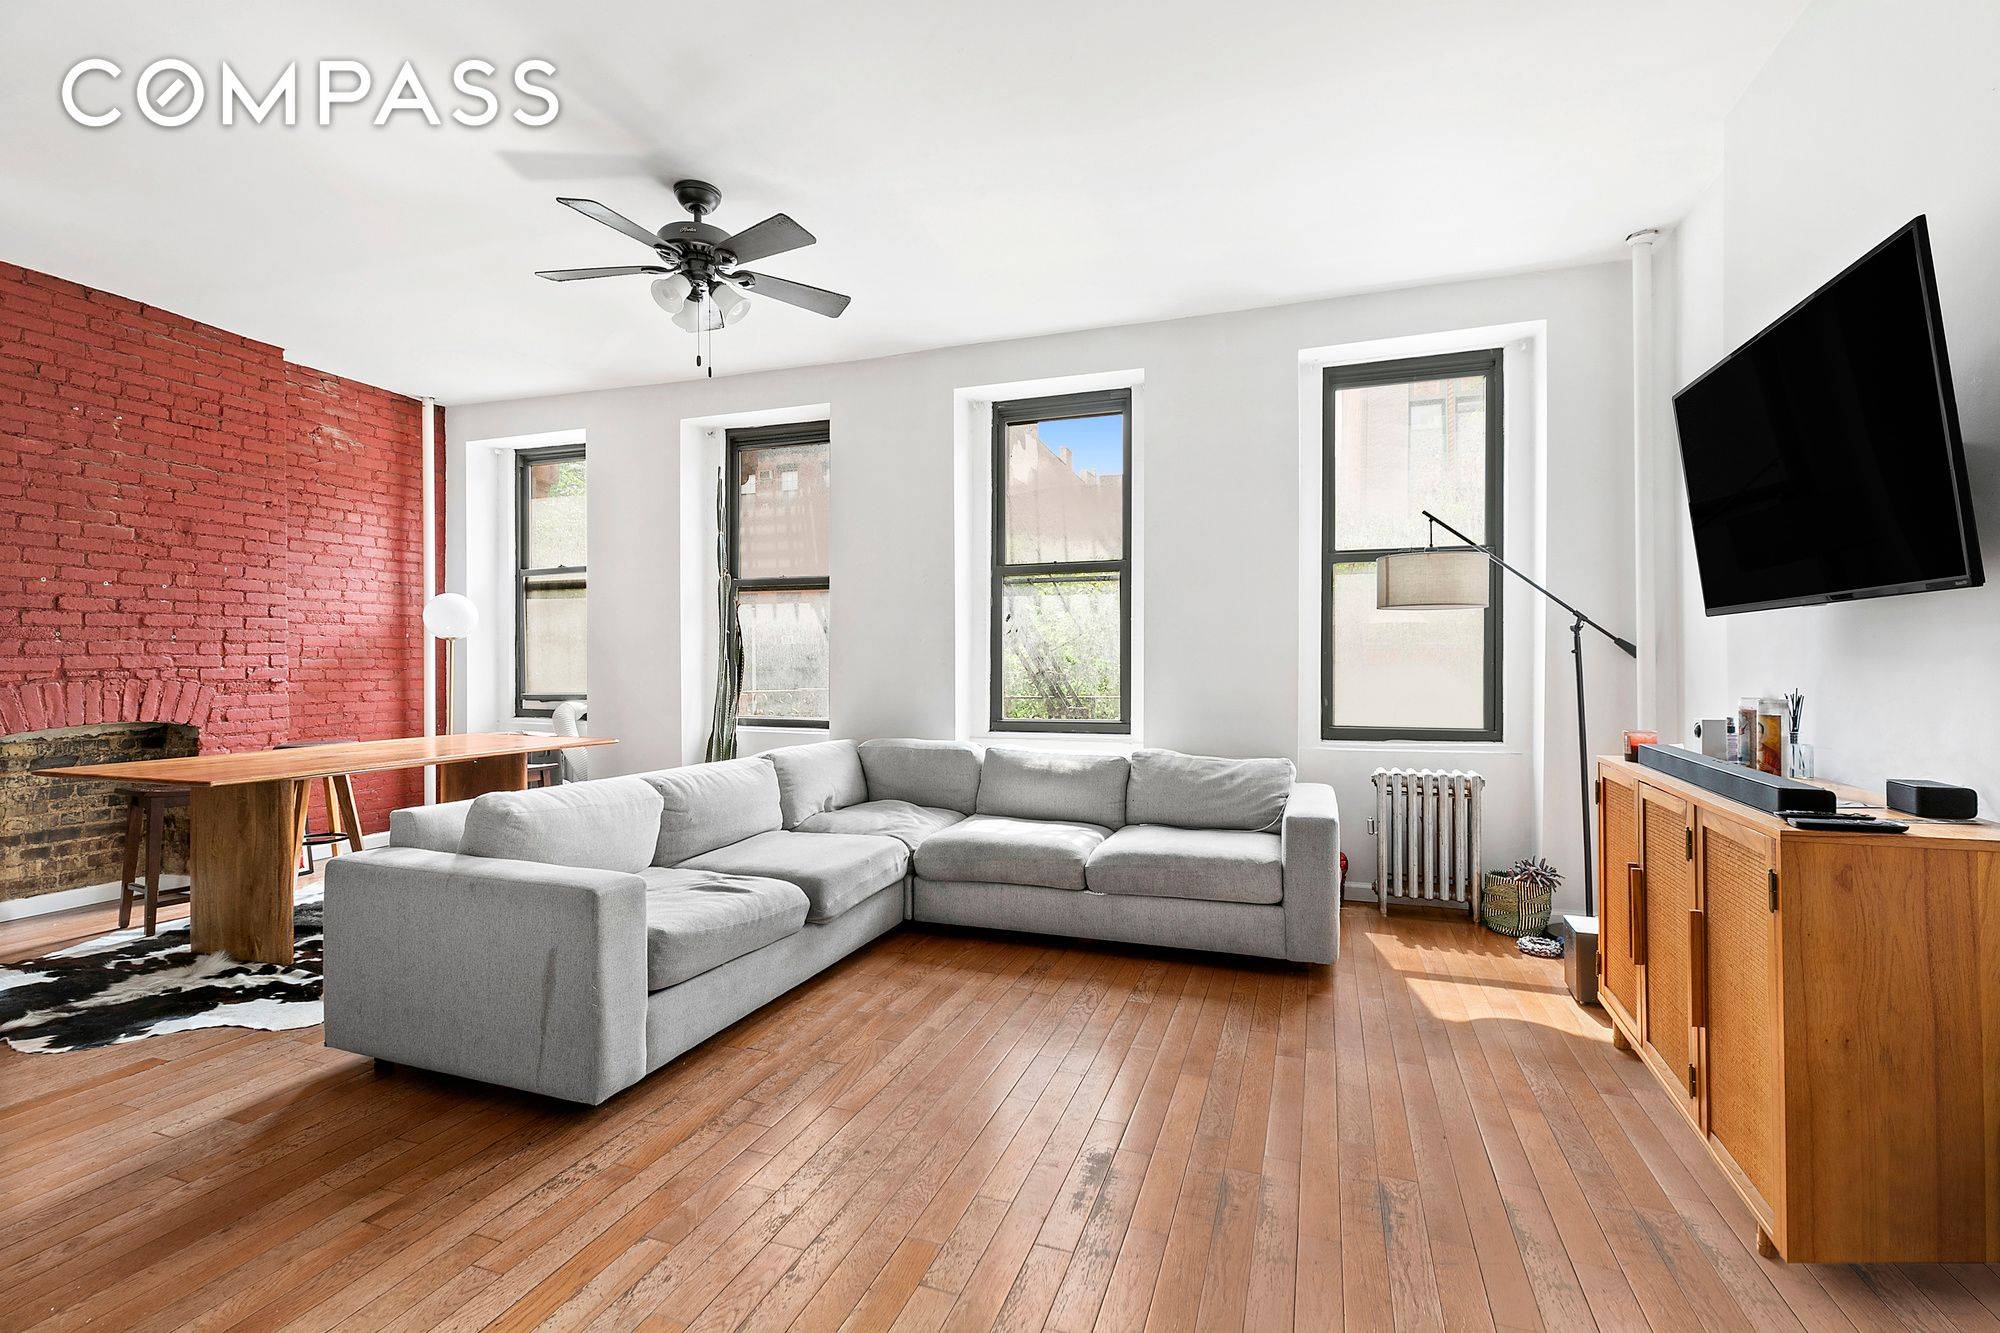 Possibly one of the largest 3 bedroom apartments in the East Village.